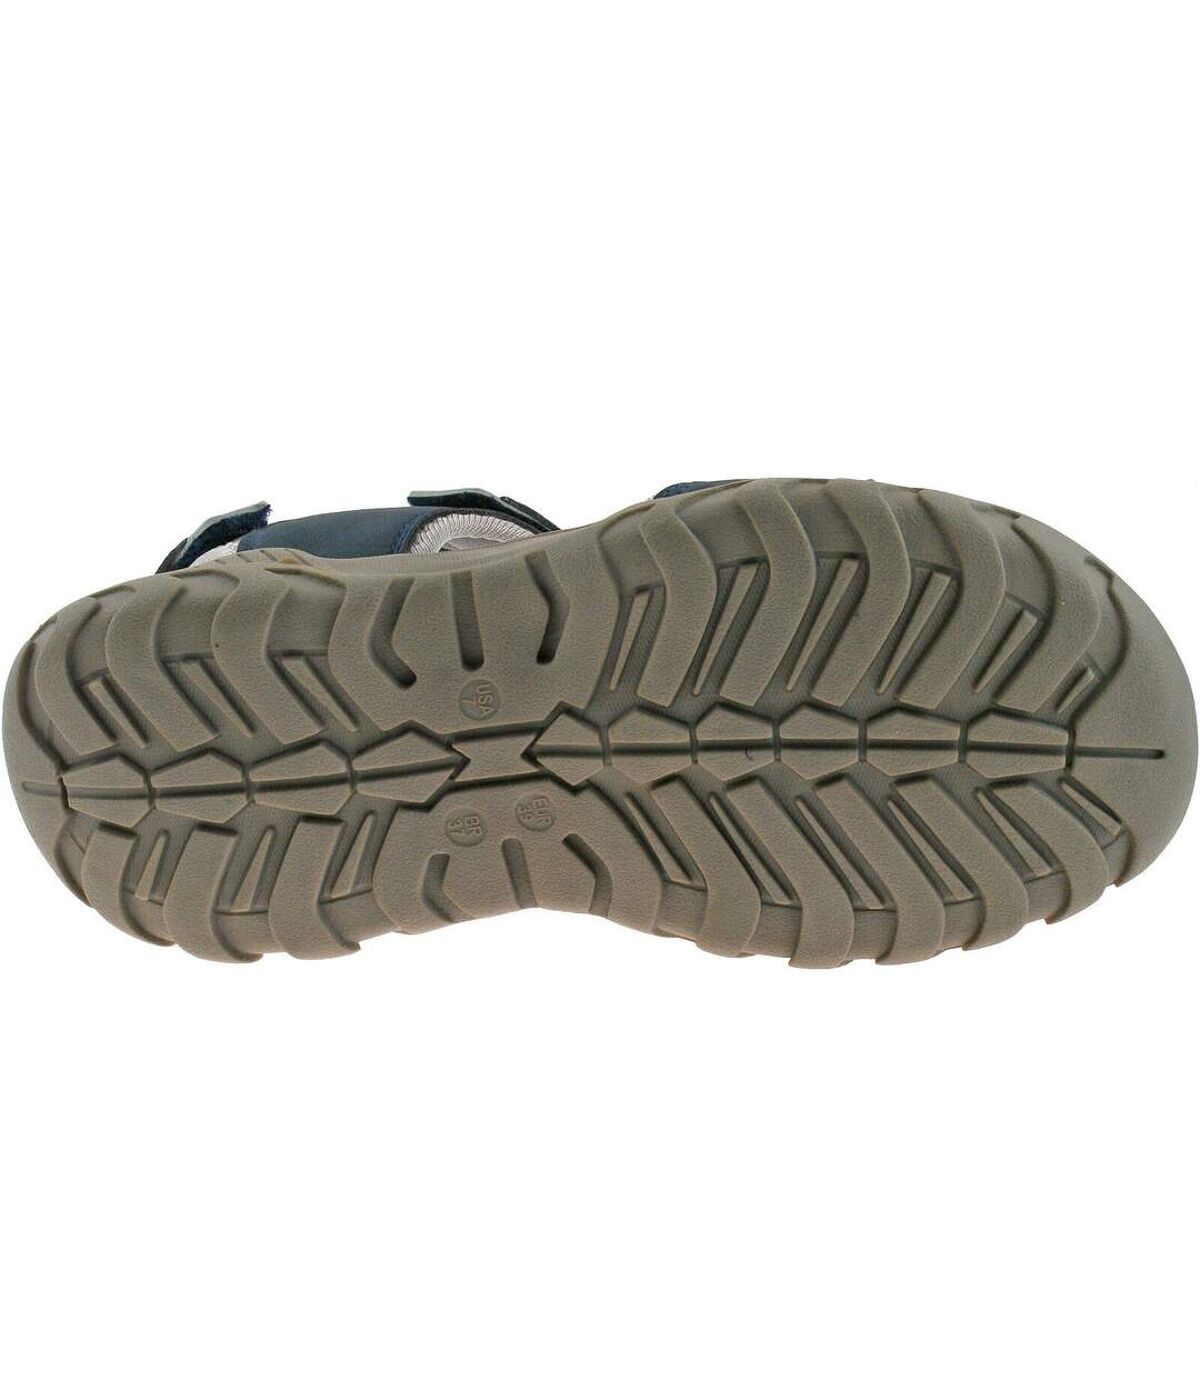 PDQ Womens/Ladies Toggle & Touch Fastening Sports Sandals (Navy/Grey) - UTDF437